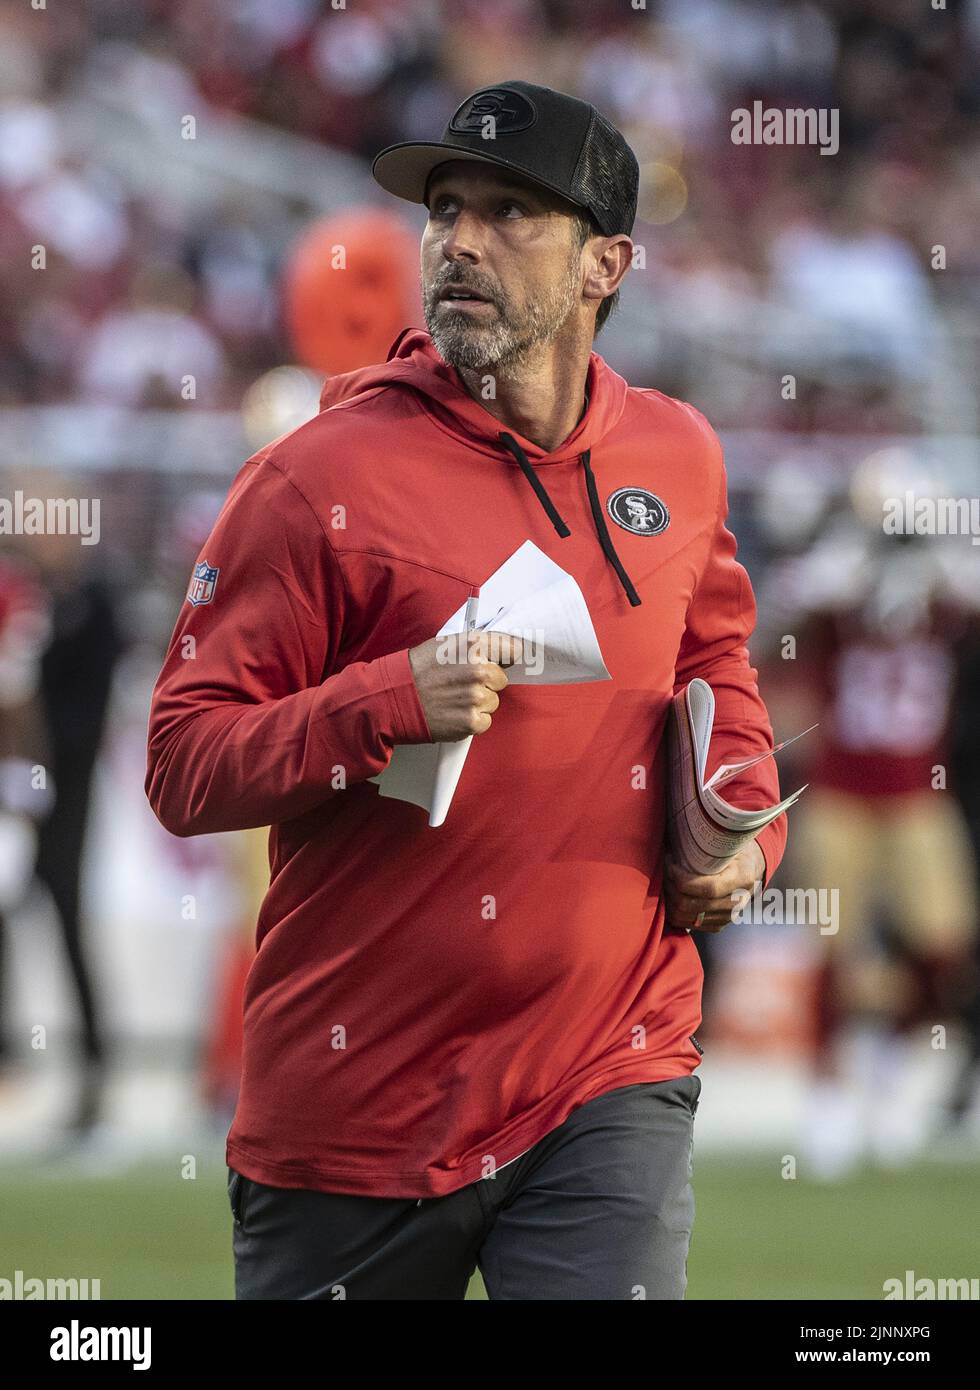 Santa Clara, USA. 13th Aug, 2022. San Francisco 49ers head coach Kyle Shanahan runs off the field at halftime against the Green Bay Packers at Levi's Stadium in Santa Clara, California on Friday, August 12, 2022. The 49ers defeated the Packers 28-21 in their first preseason game Photo by Terry Schmitt/UPI Credit: UPI/Alamy Live News Stock Photo